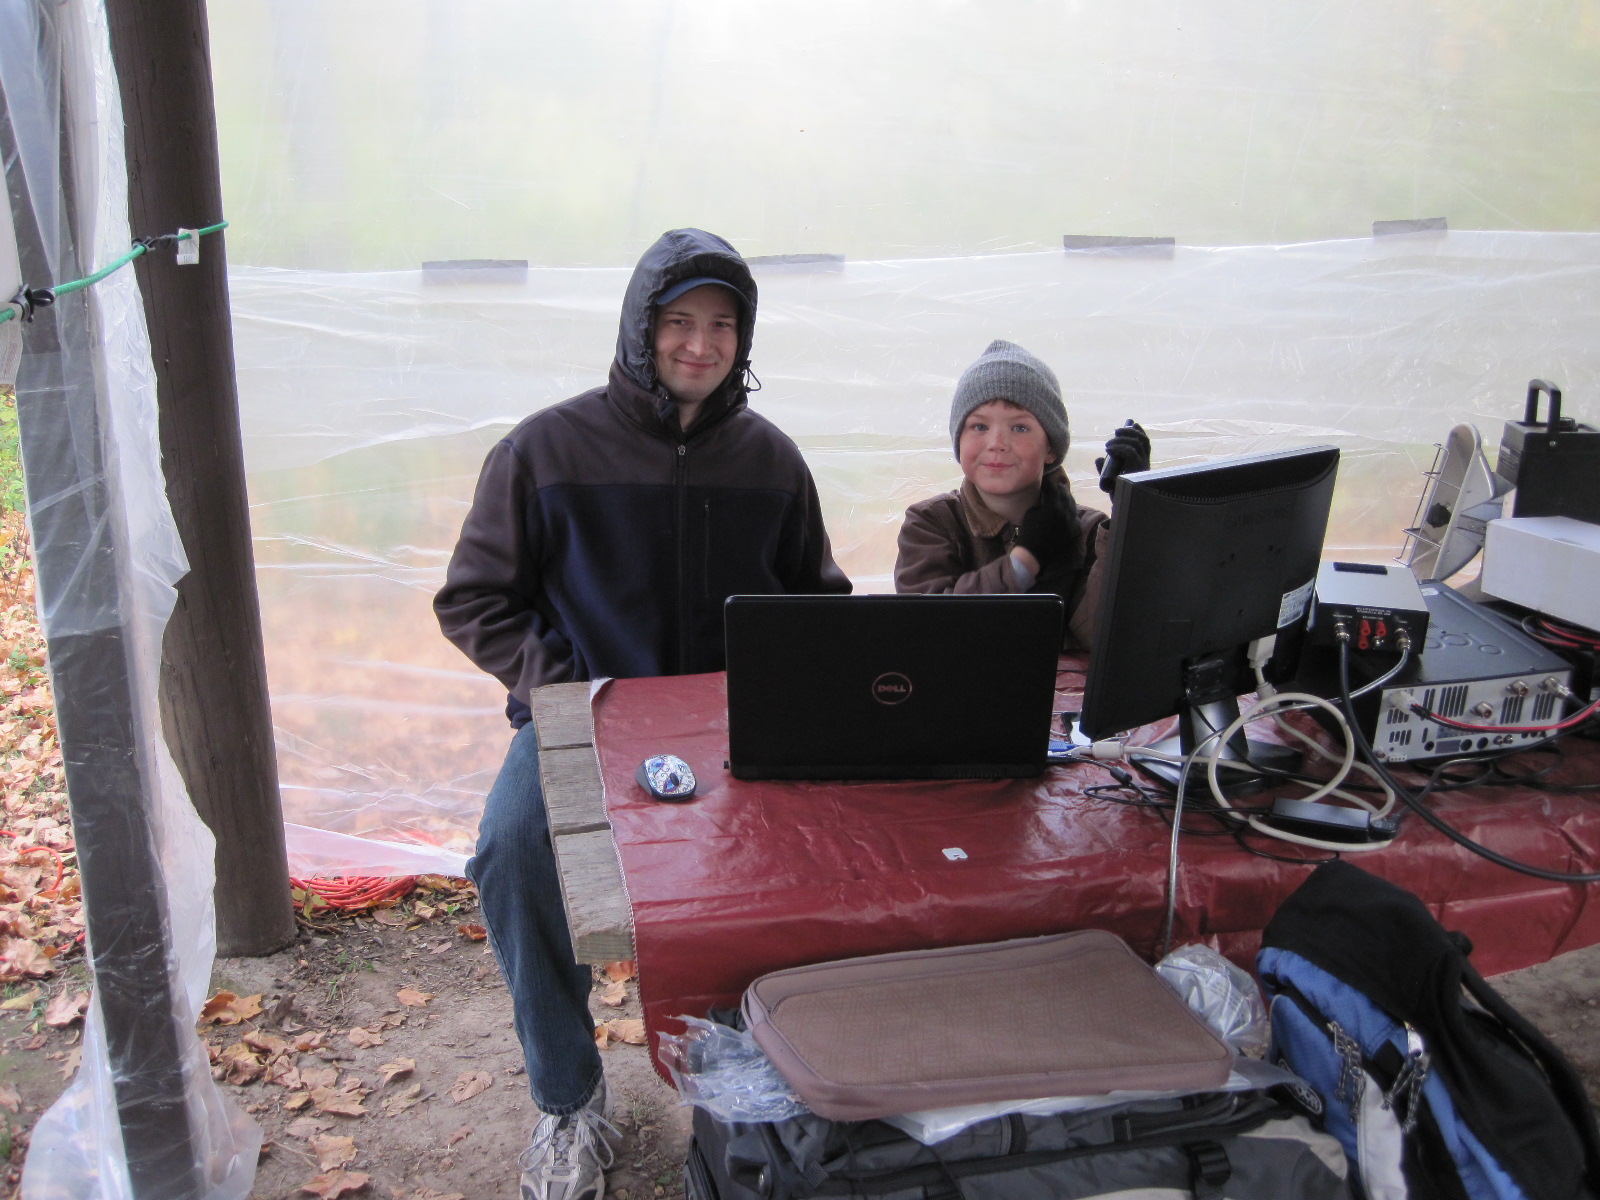 Greg N0GES (a new Boone Co ARES Member) with boy scout Roland (son of KD0VCX) operating a digital JOTA station